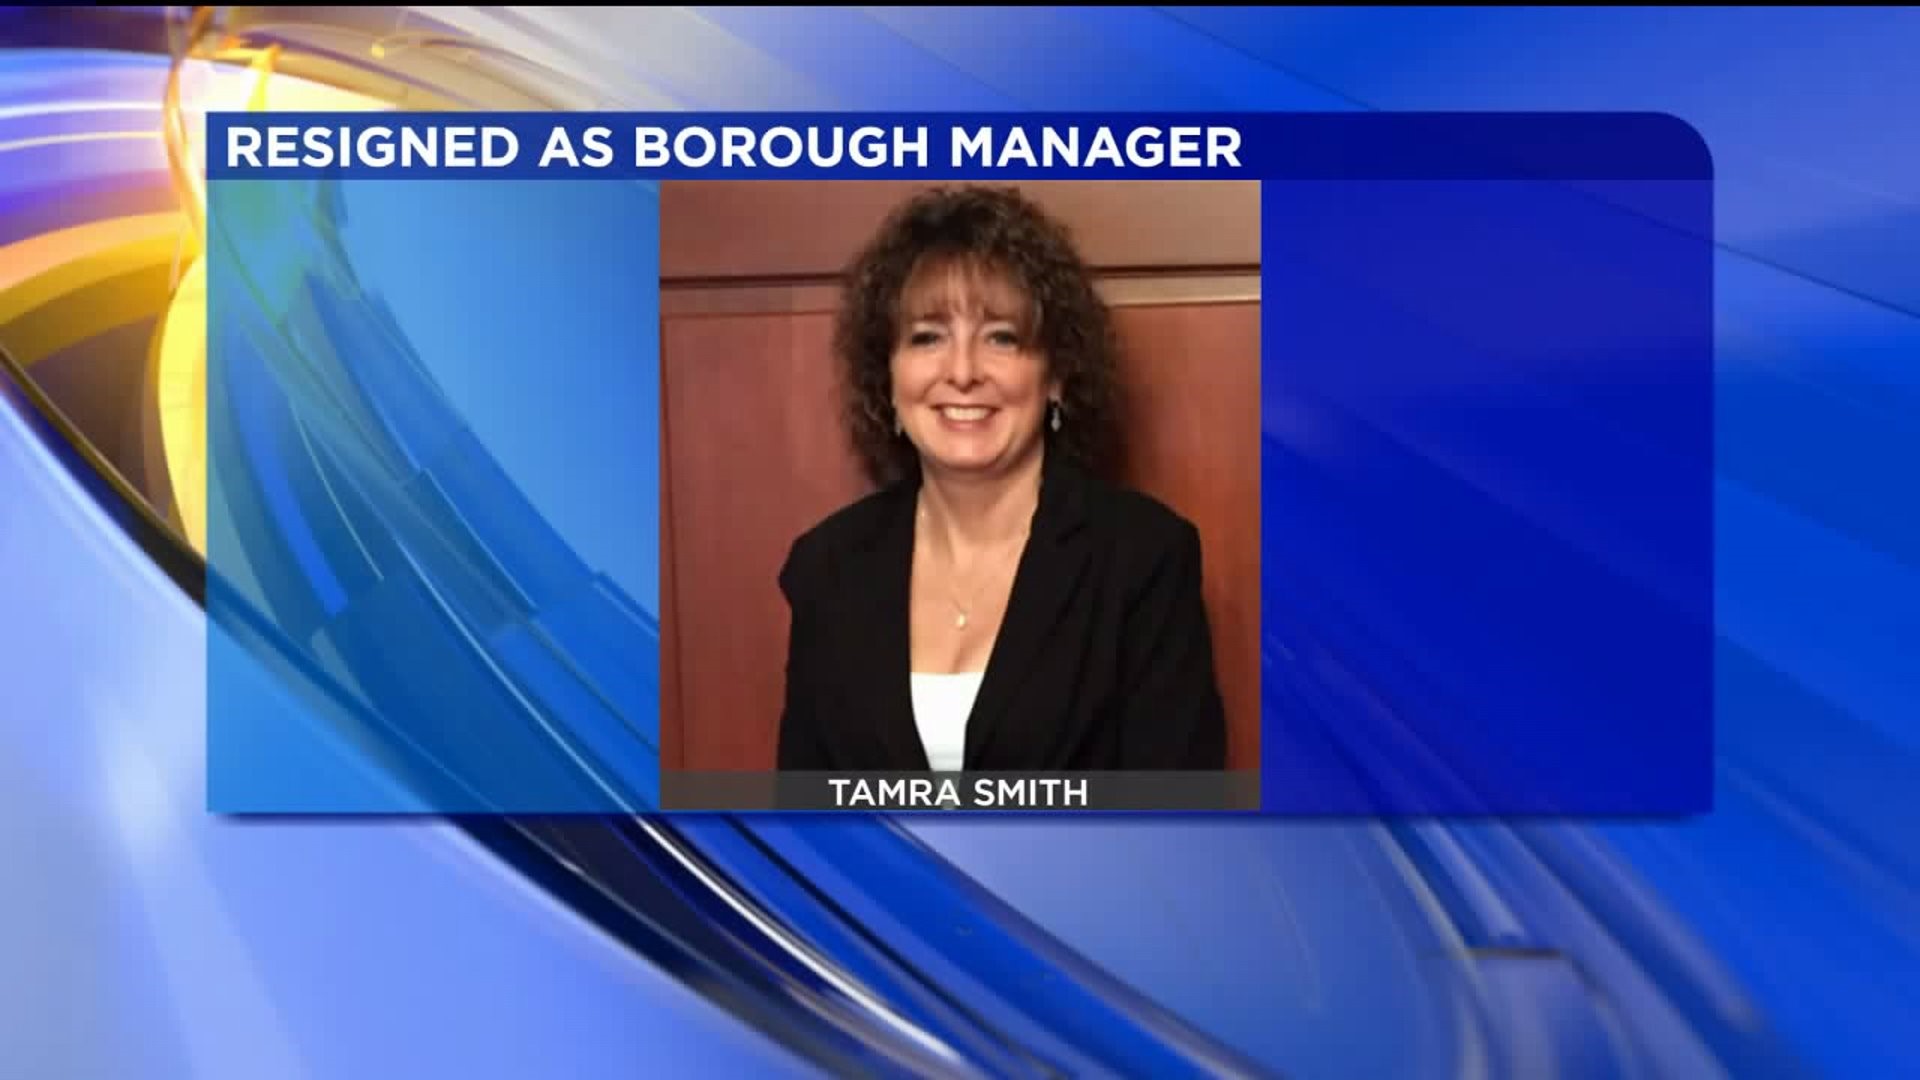 Embattled Borough Manager Resigns